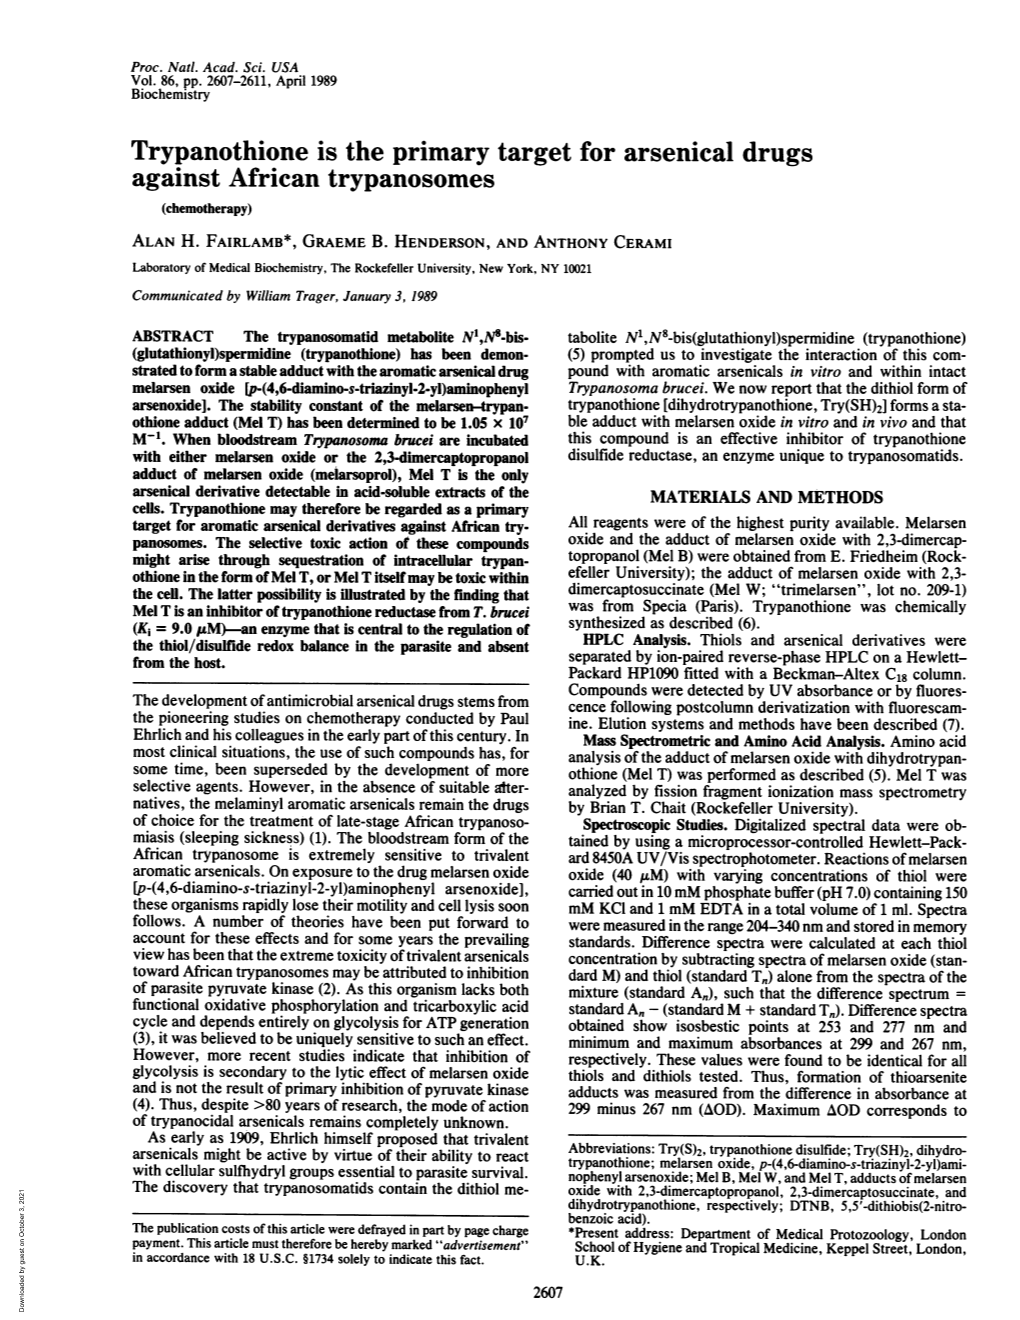 Trypanothione Is the Primary Target for Arsenical Drugs Against African Trypanosomes (Chemotherapy) ALAN H